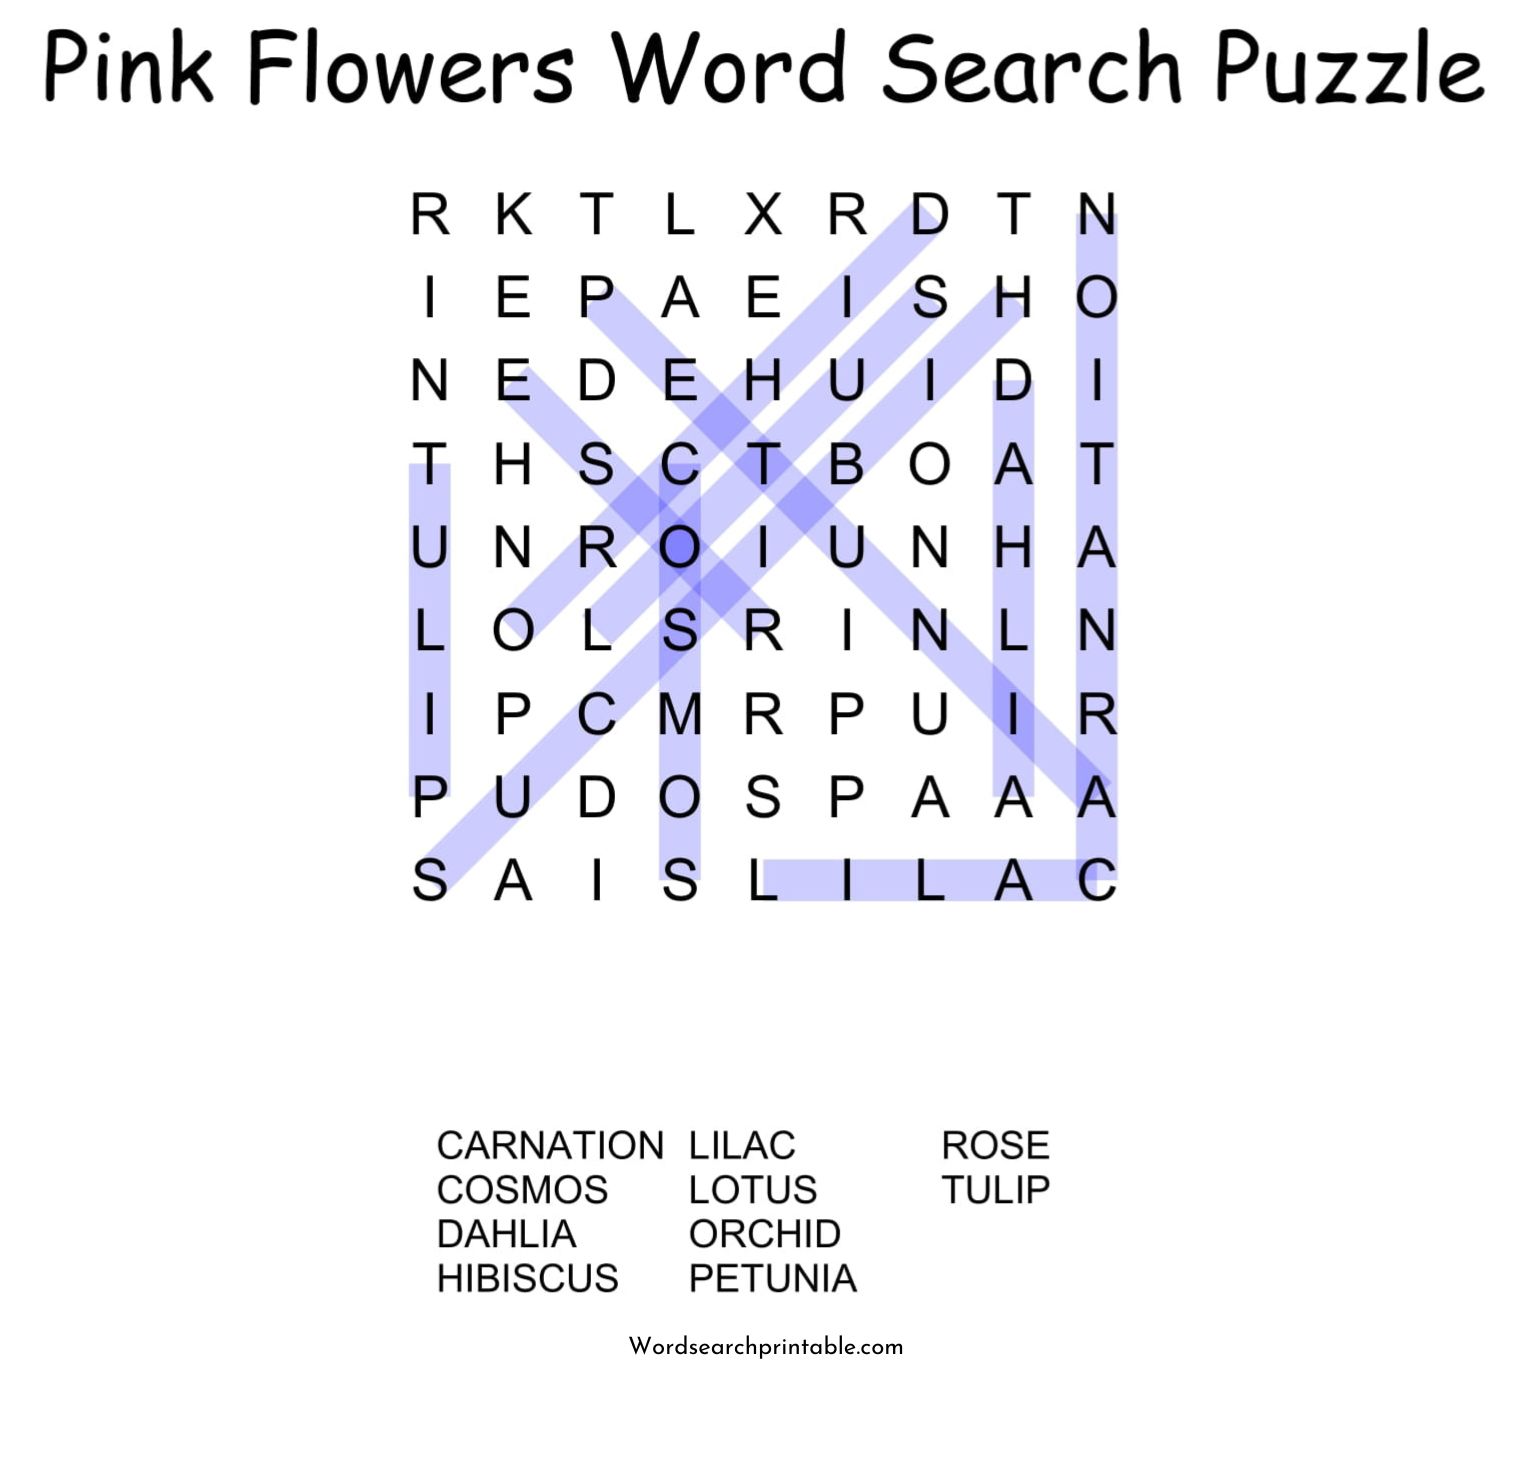 pink flowers word search puzzle solution